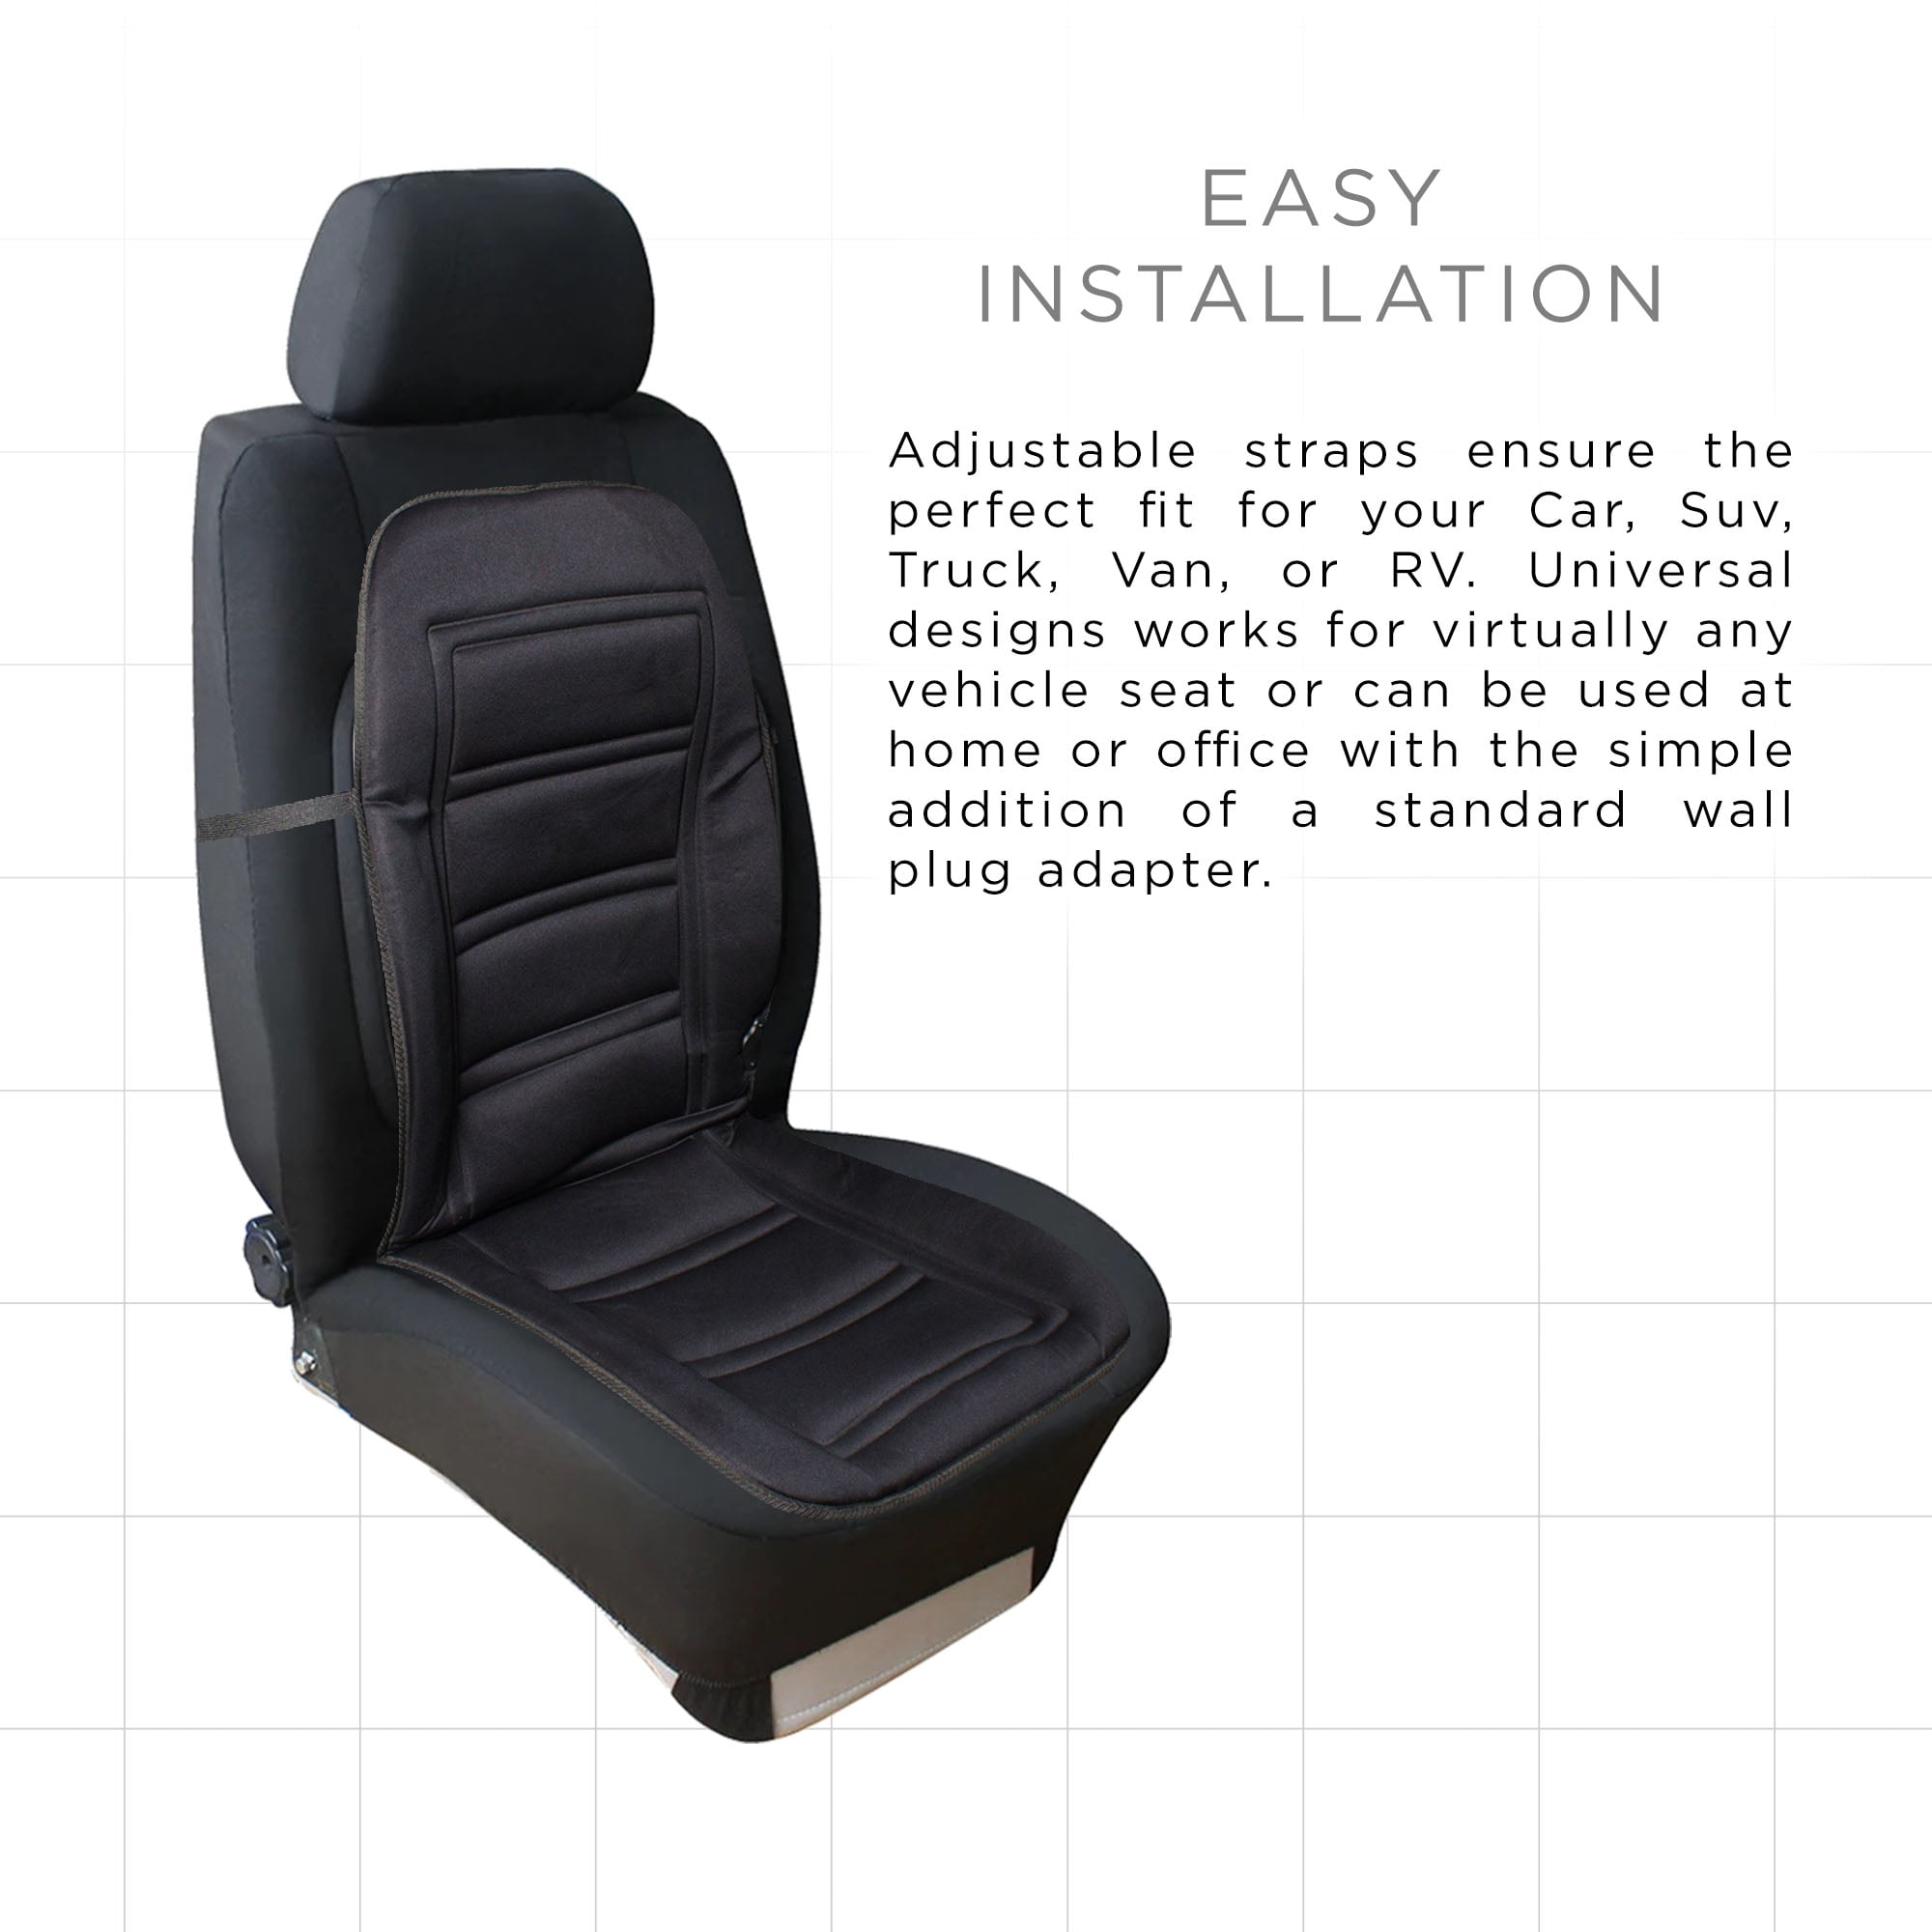 The Cooling / Heating Automobile Seat Cushion - Hammacher Schlemmer